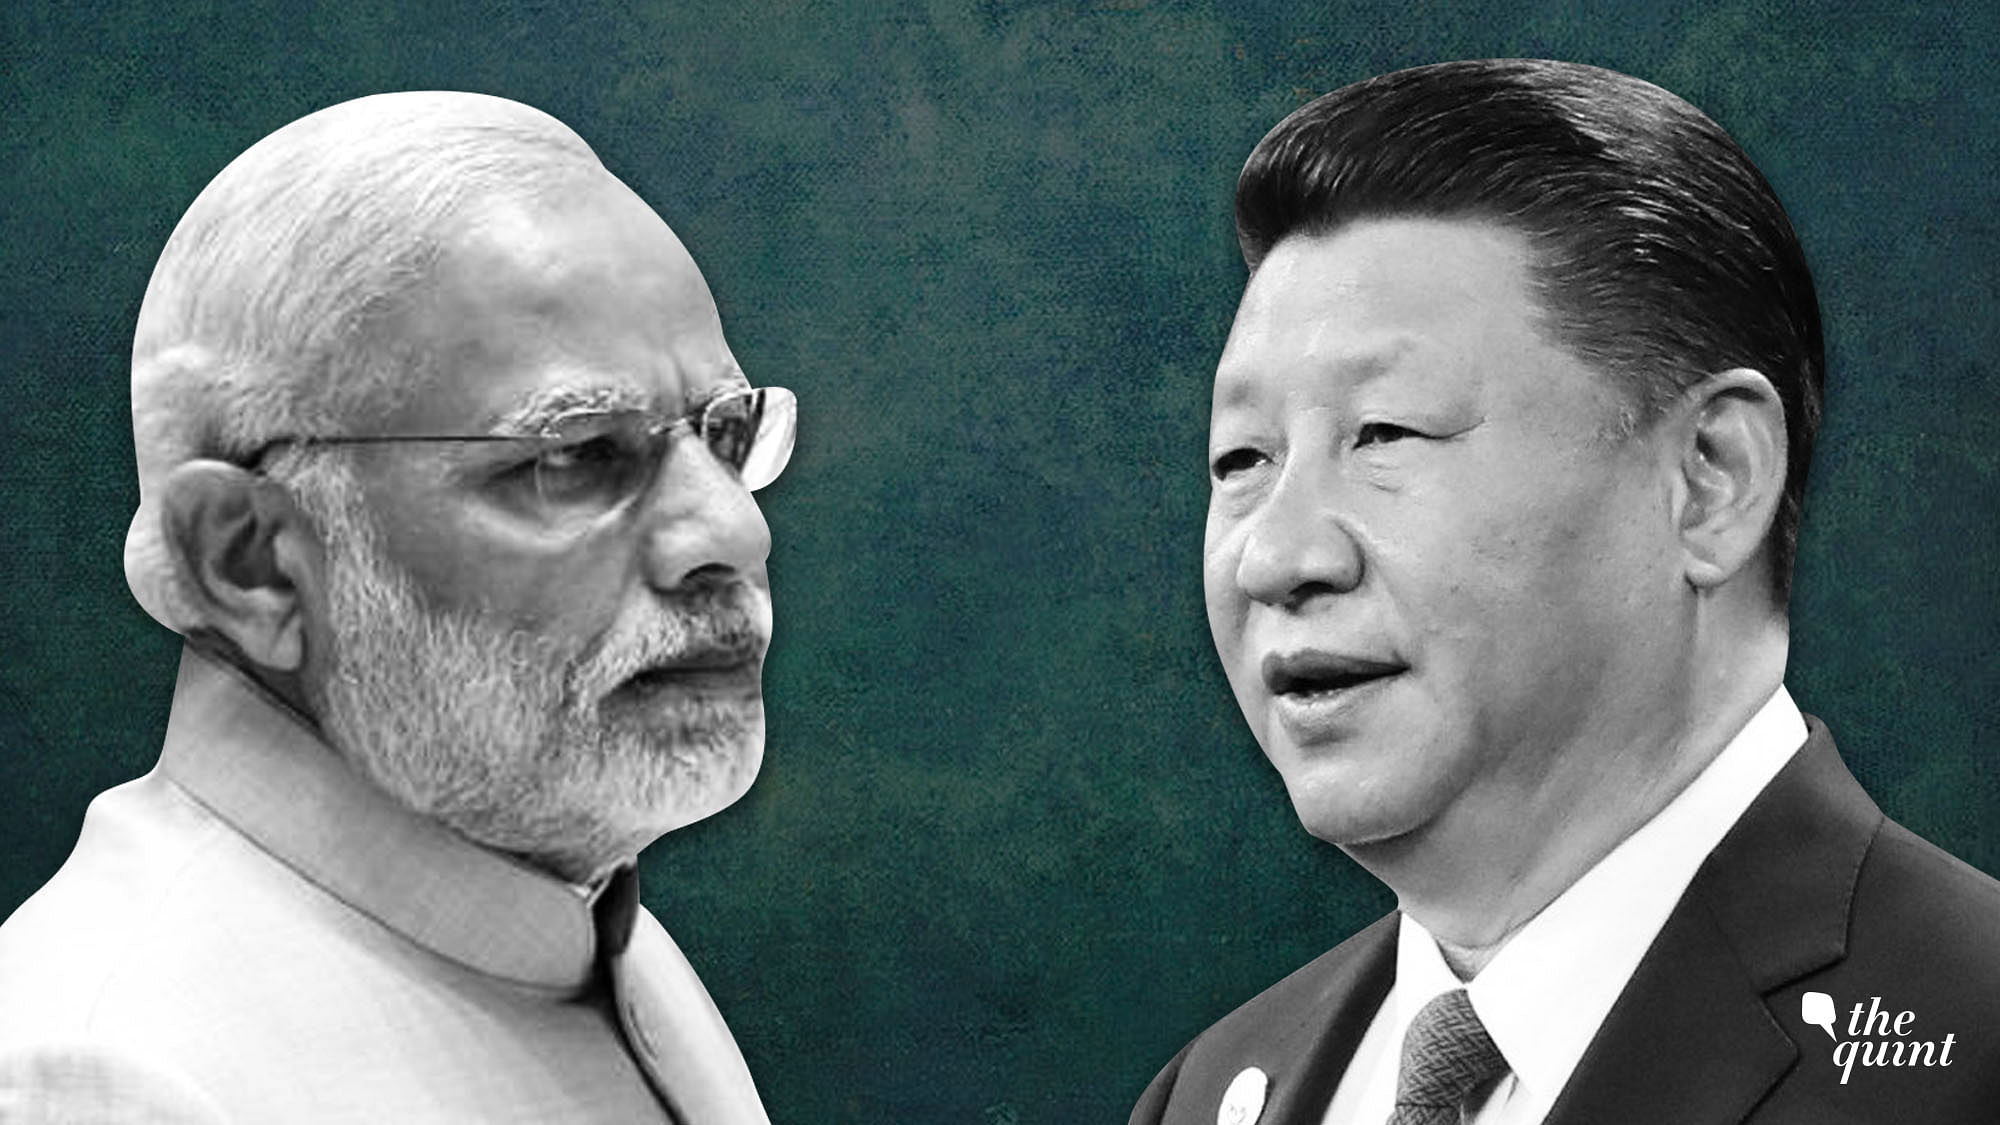 Nothing of great consequence is likely to emerge from the summit itself. But there has been a considerable amount of interest in the Xi-Modi meeting held at the sidelines on Thursday, 13 June.